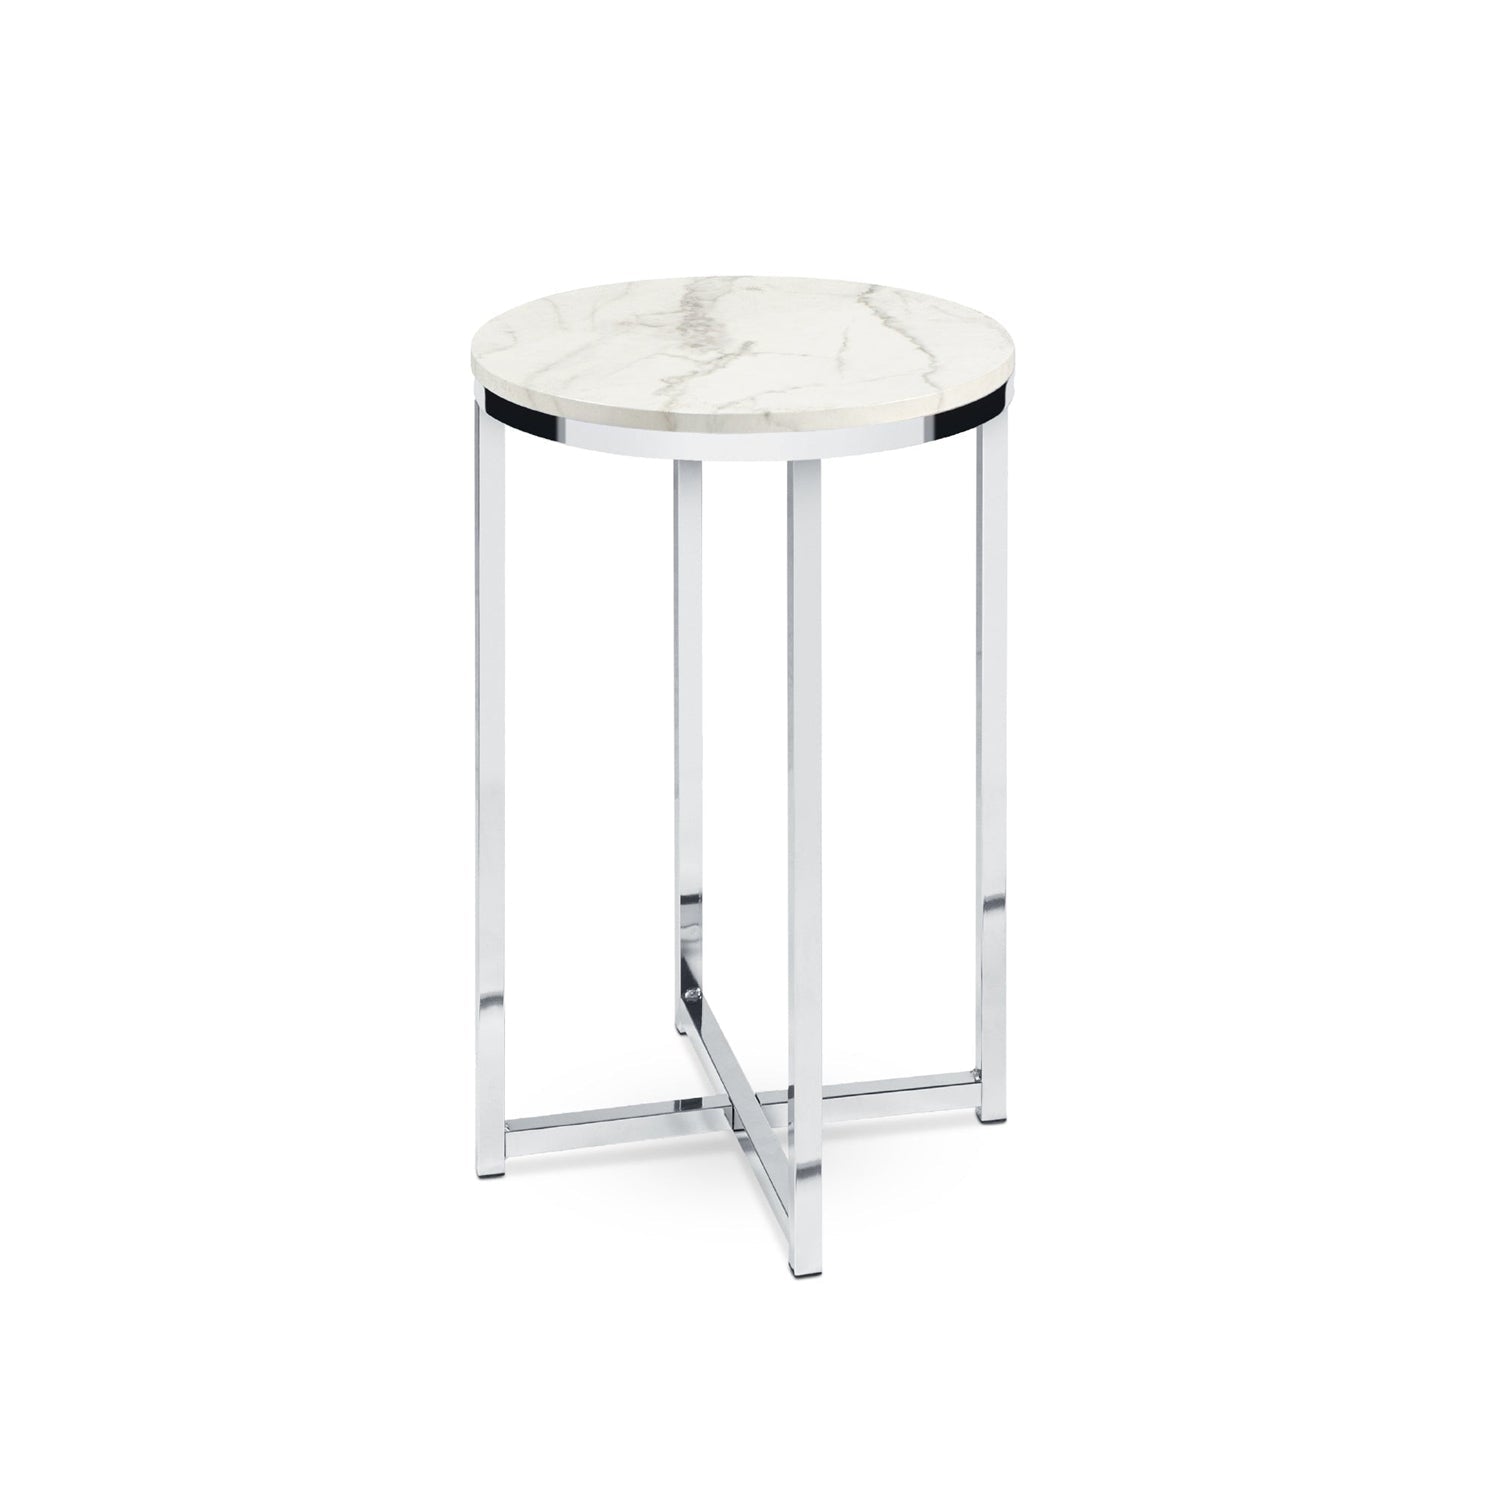 Bedroom > Nightstand And Dressers - Round Cross Leg Design Coffee Side Table Nightstand With Faux Marble Top White/Chrome